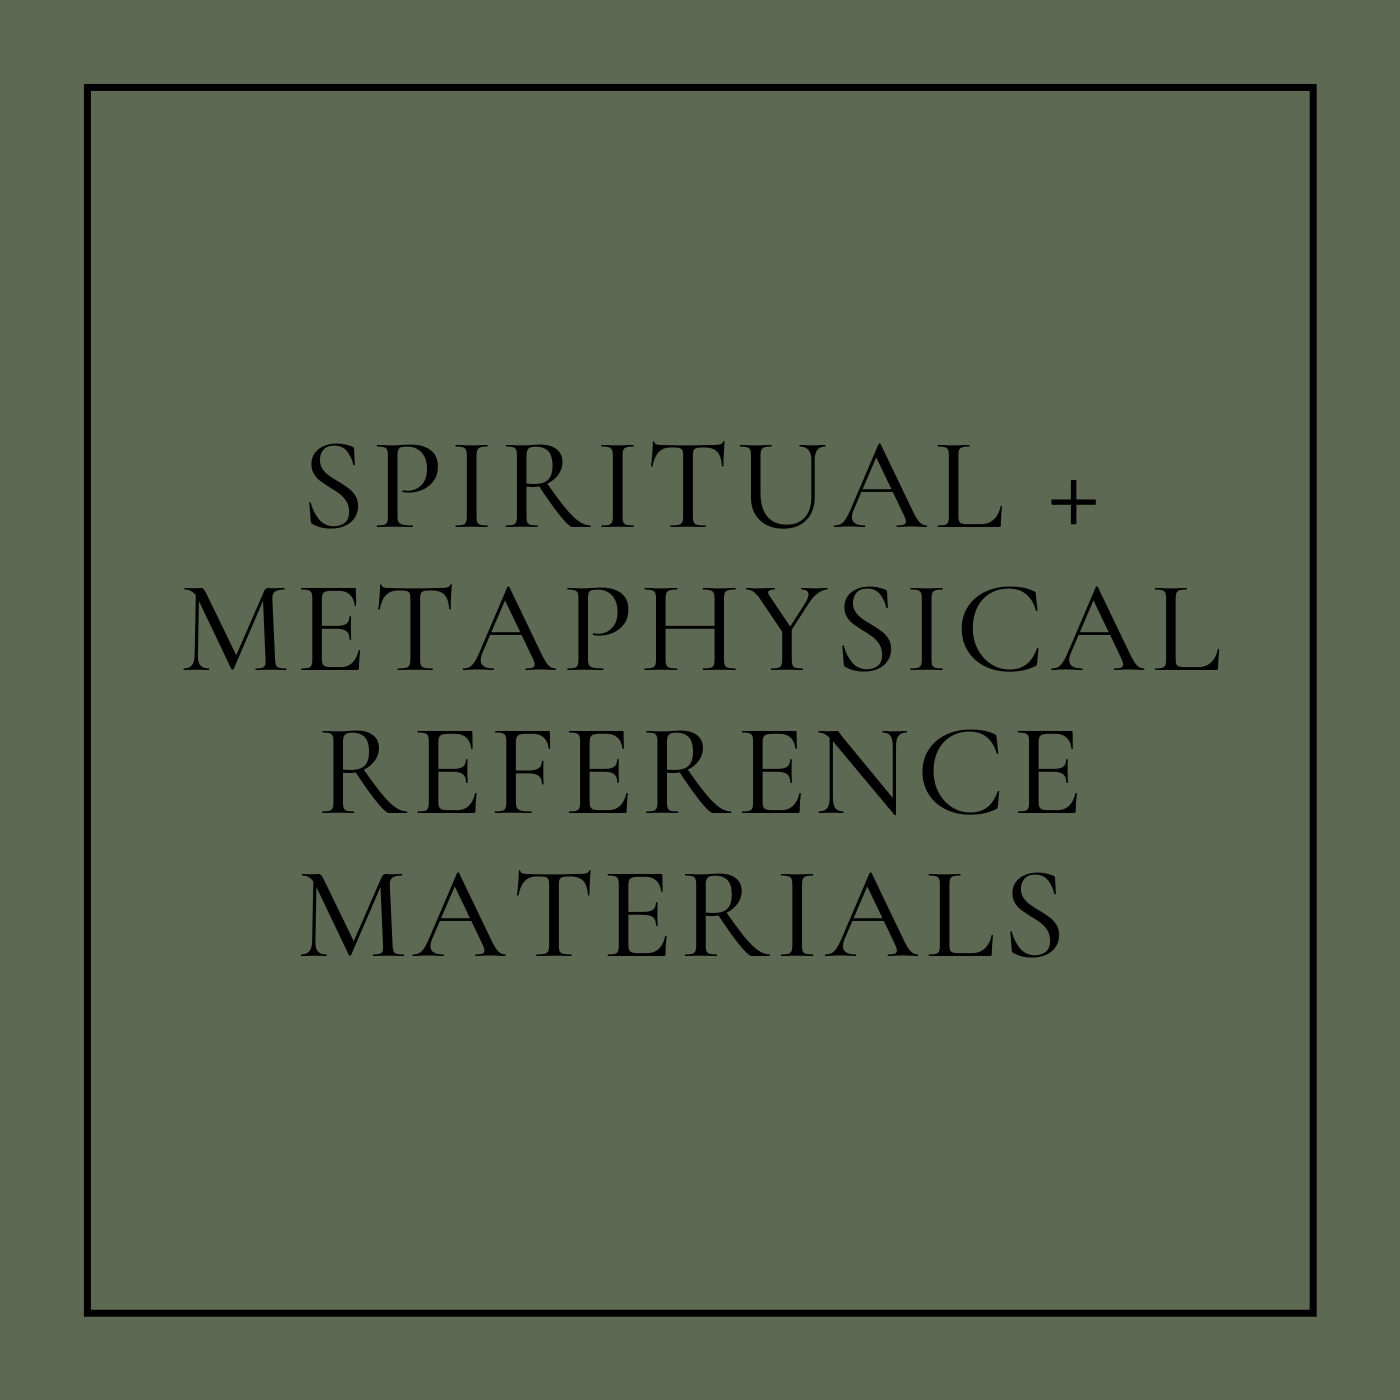 SPIRITUAL + METAPHYSICAL REFERENCE MATERIALS